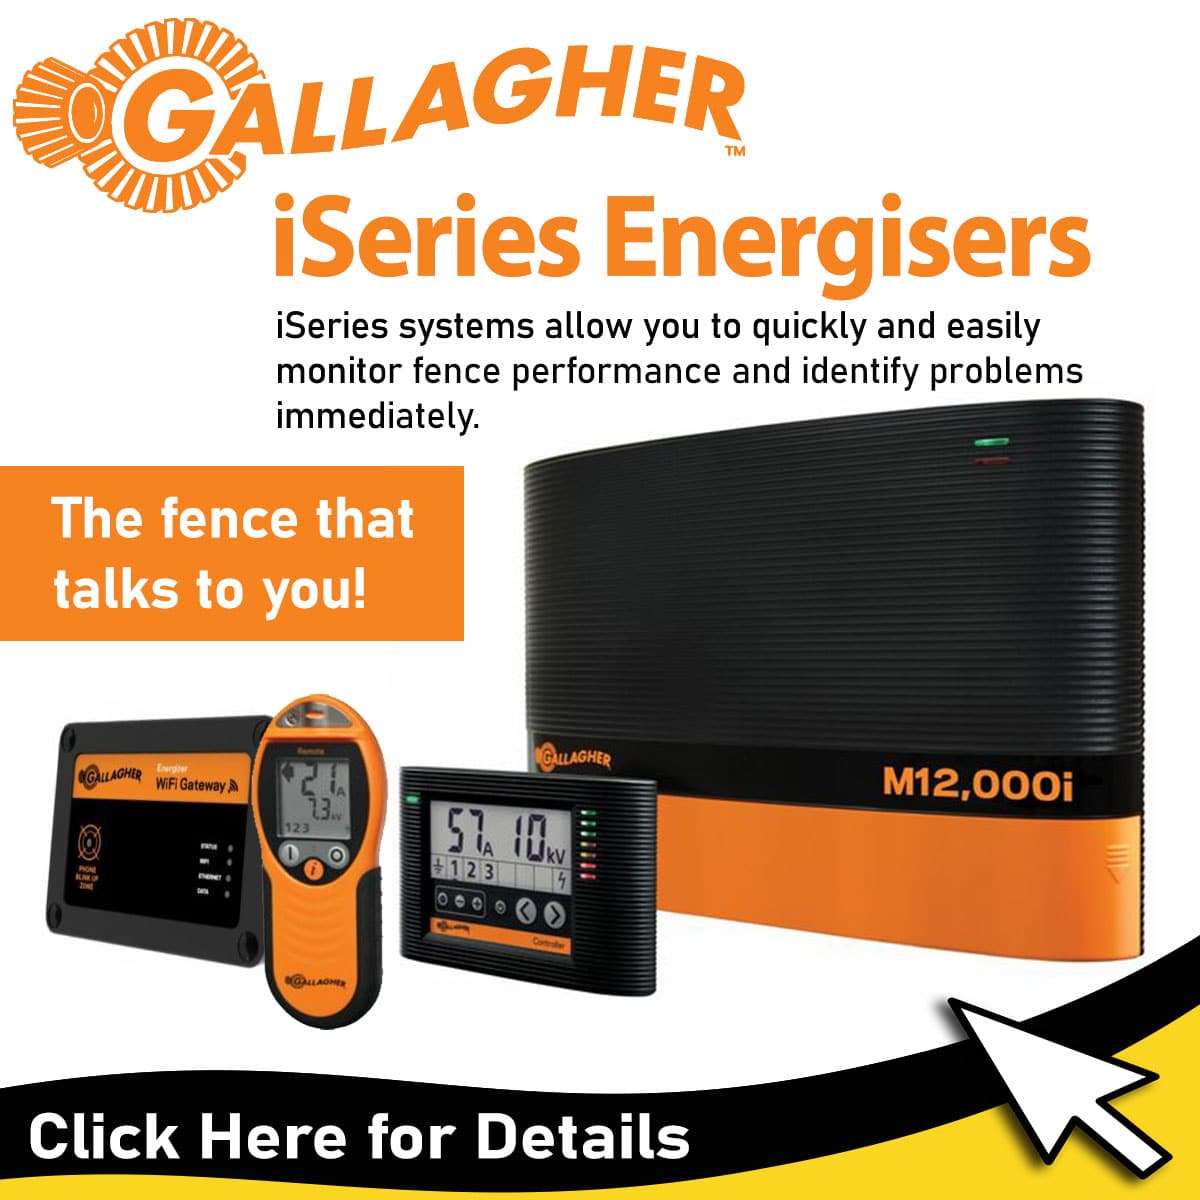 Gallagher Energisers